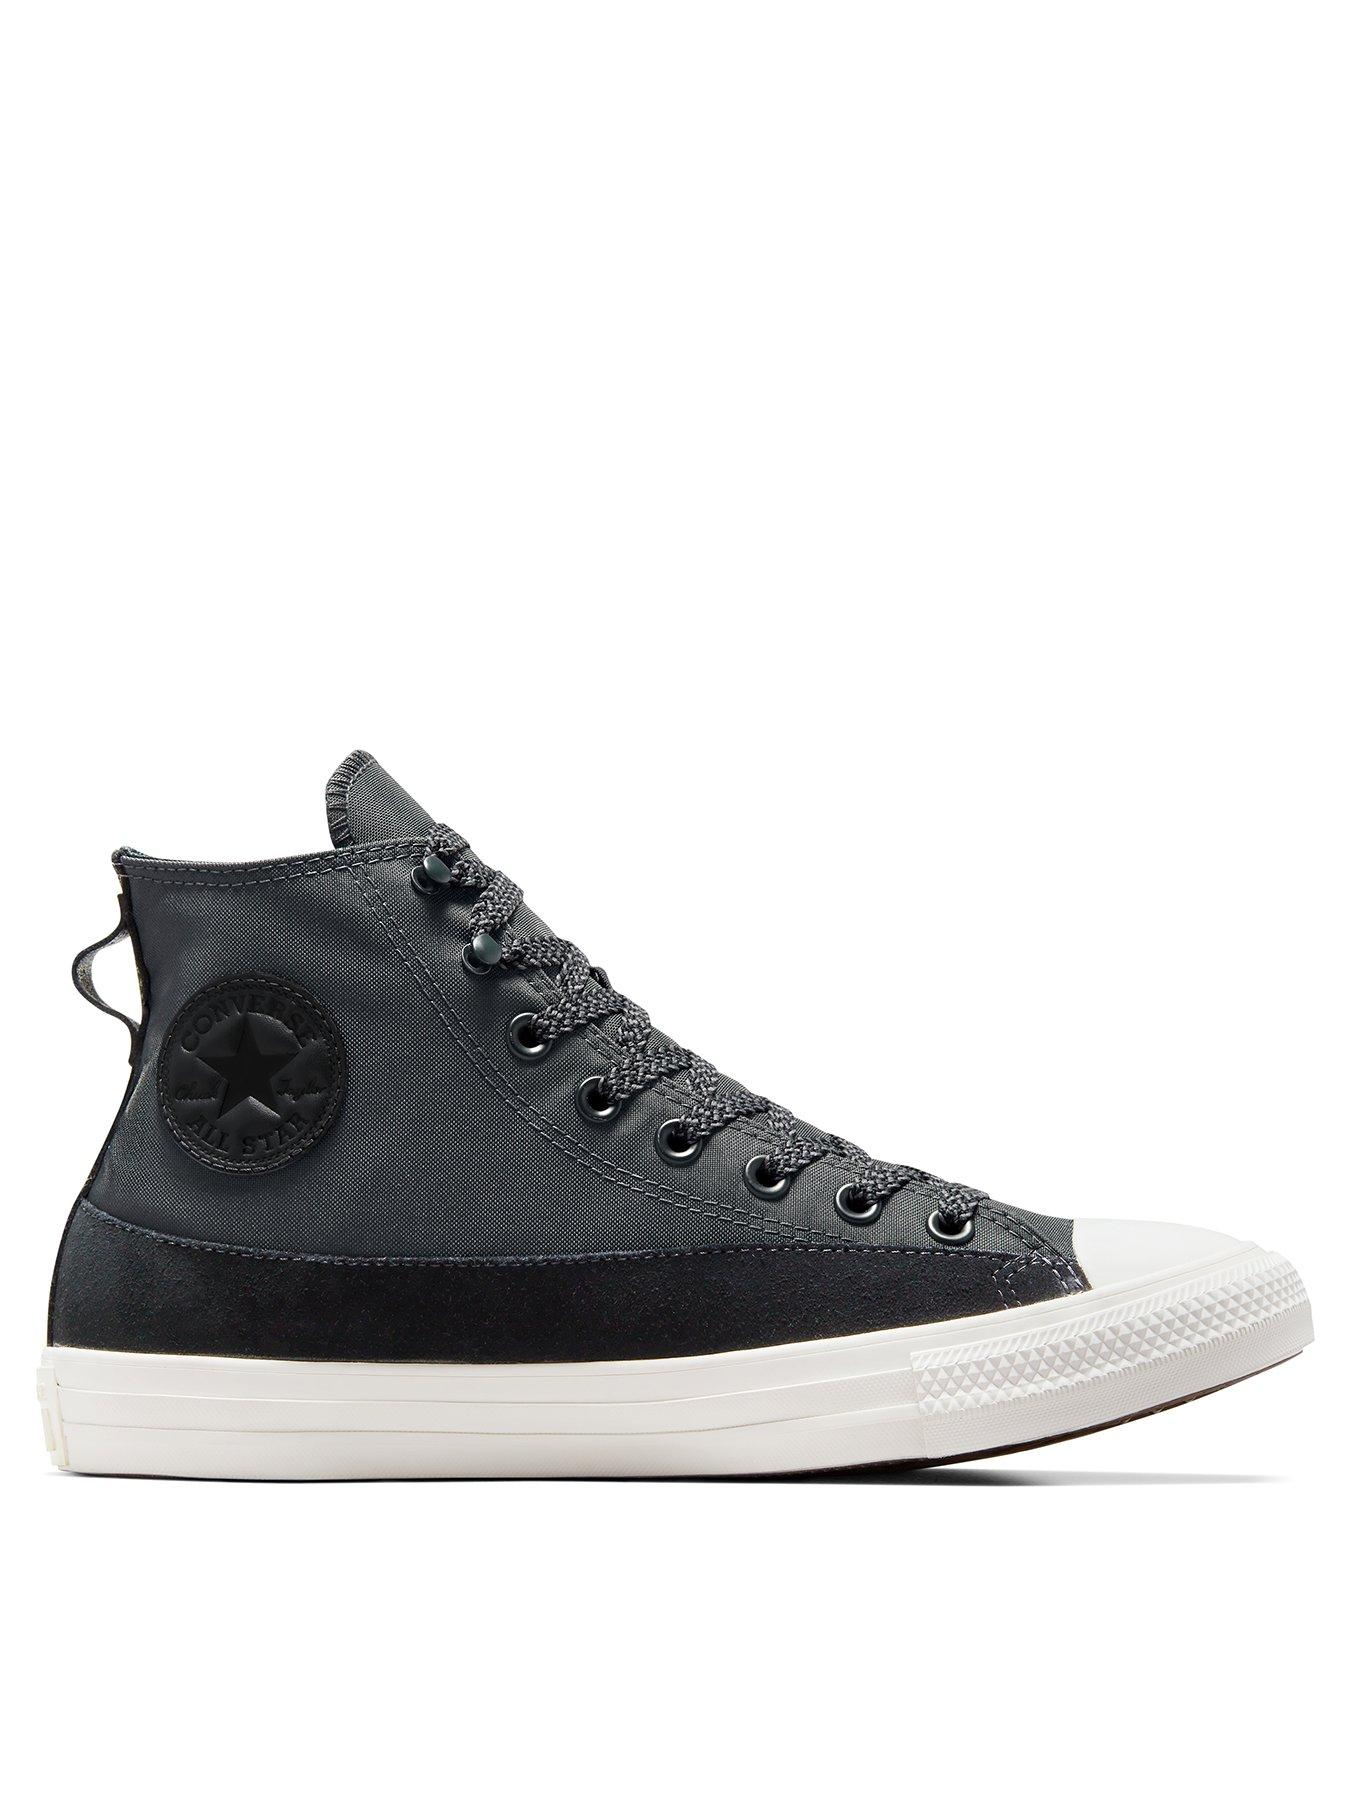 Converse Shoes, Trainers & Clothing Ireland Very | High | Tops